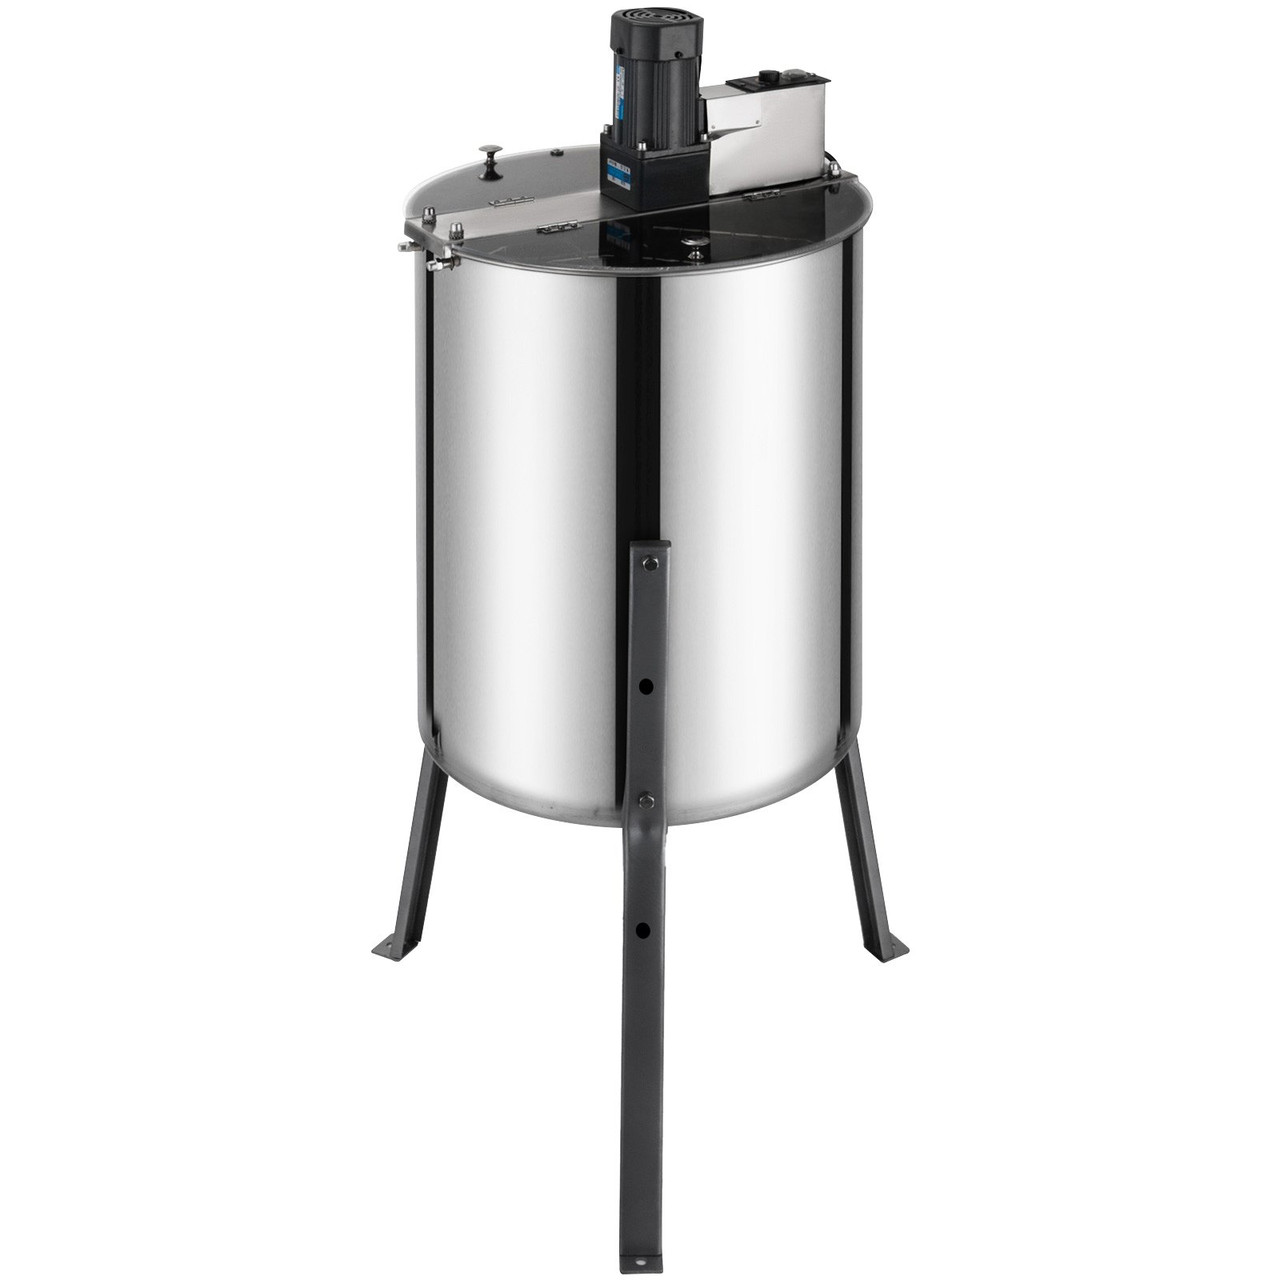 VEVOR Electric Honey Extractor 4 Frame Bee Honey Extractor Separator Stainless Steel Honey Frame Extractor Spinner Drum Beekeeping Extractor Apiary Centrifuge Equipment
